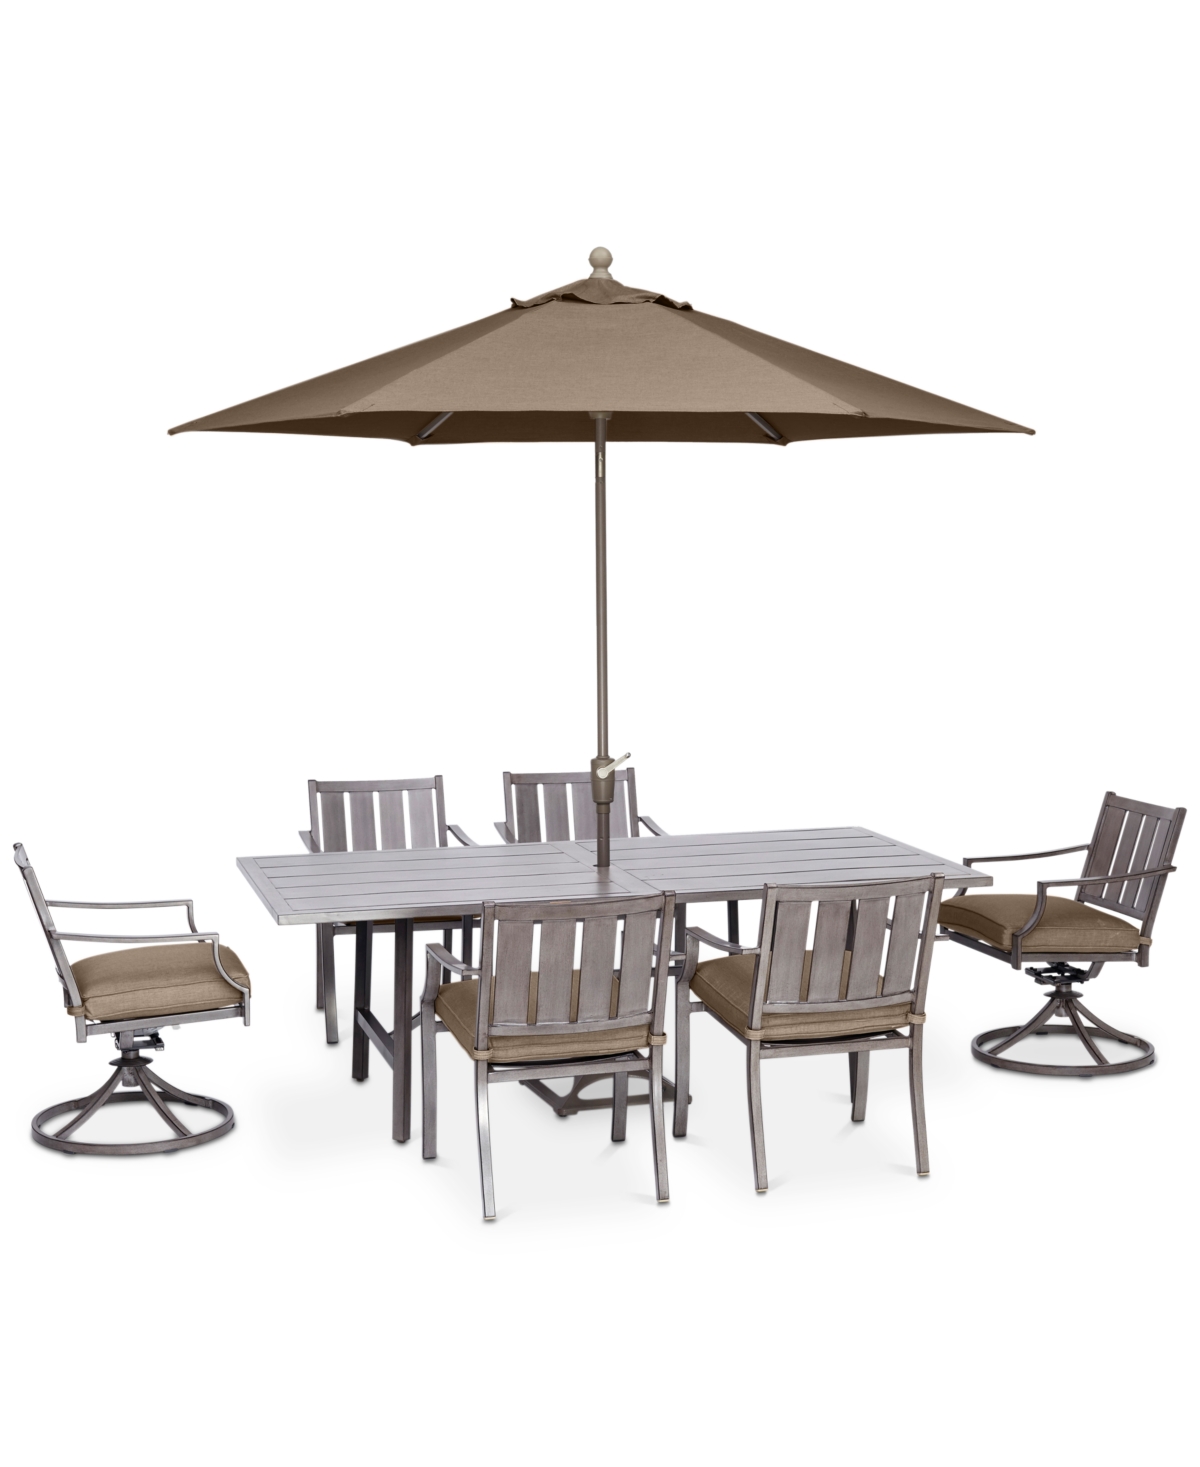 Agio Wayland Outdoor Aluminum 7-pc. Dining Set (84" X 42" Rectangle Dining Table, 4 Dining Chairs & 2 Swi In Outdura Remy Pebble